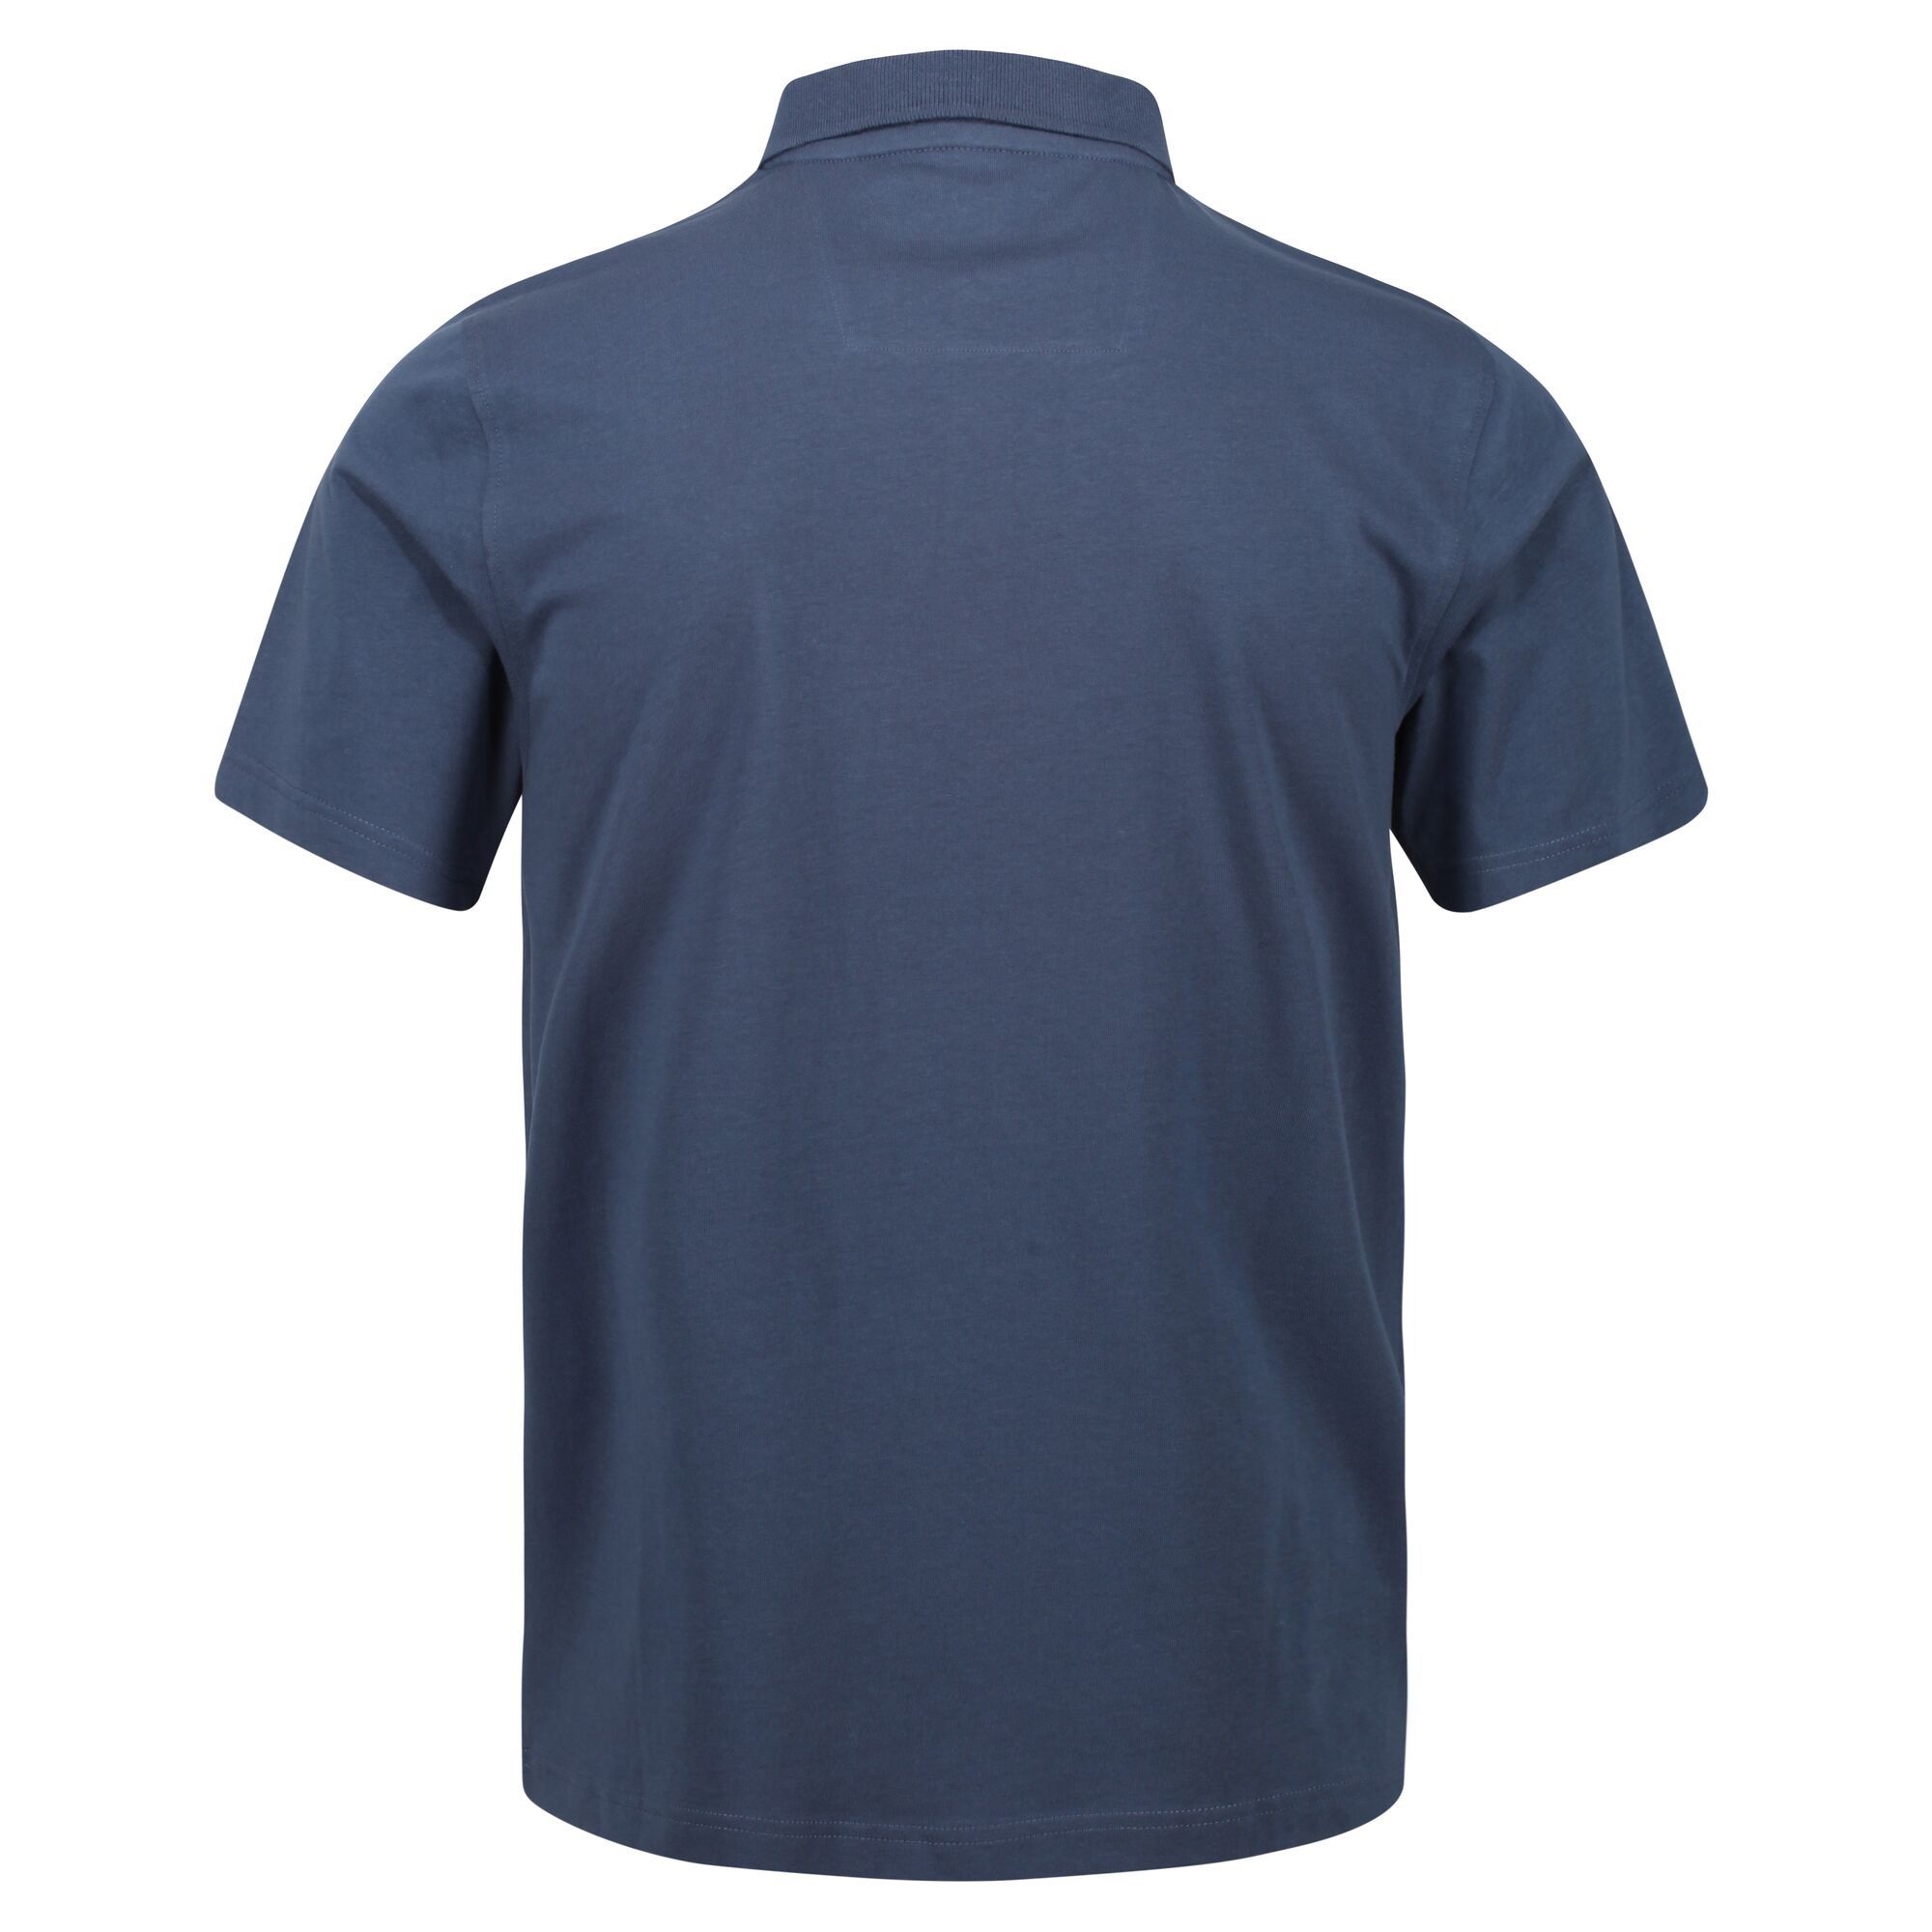 Material: 100% cotton jersey fabric. Super soft handle. Ribbed collar. 3 button placket.